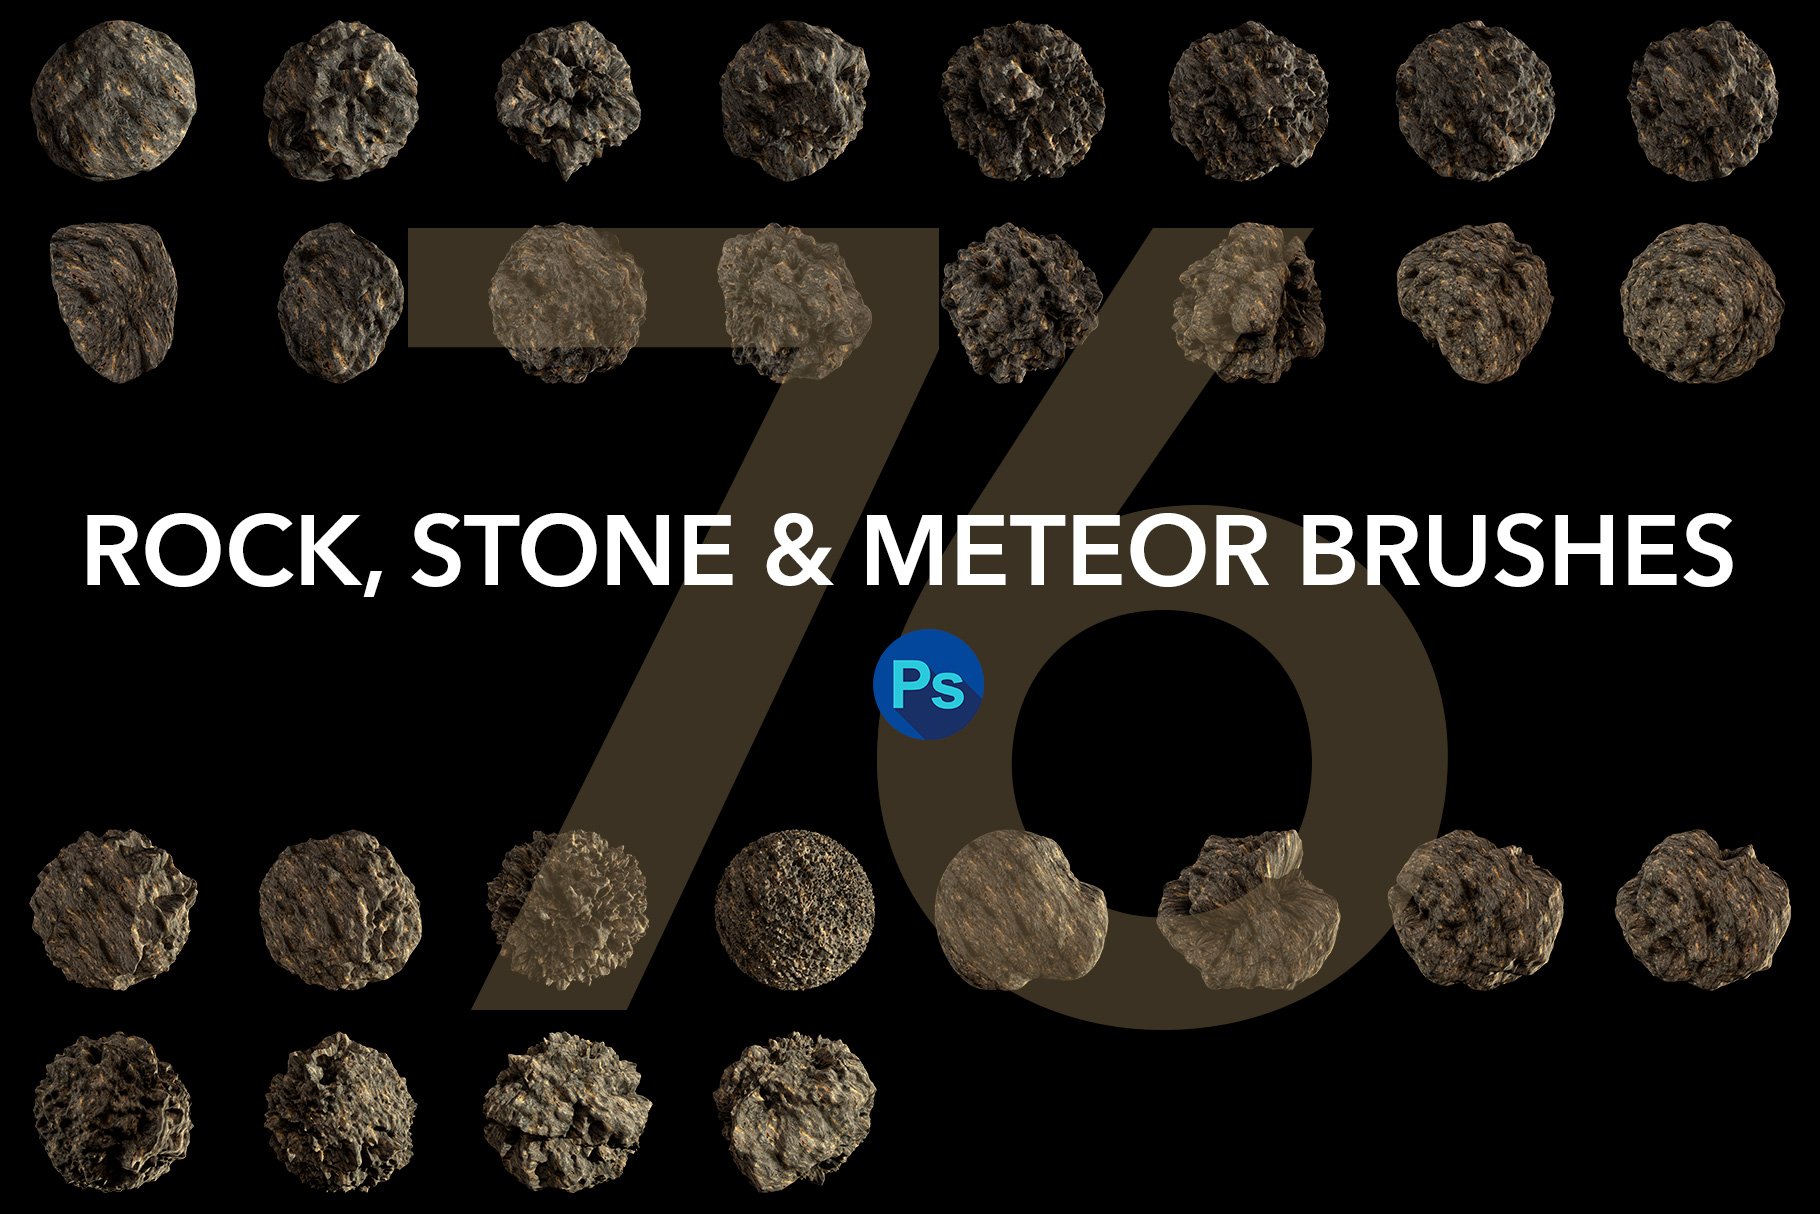 Rock,Stone and Meteor Brushes for PSpreview image.